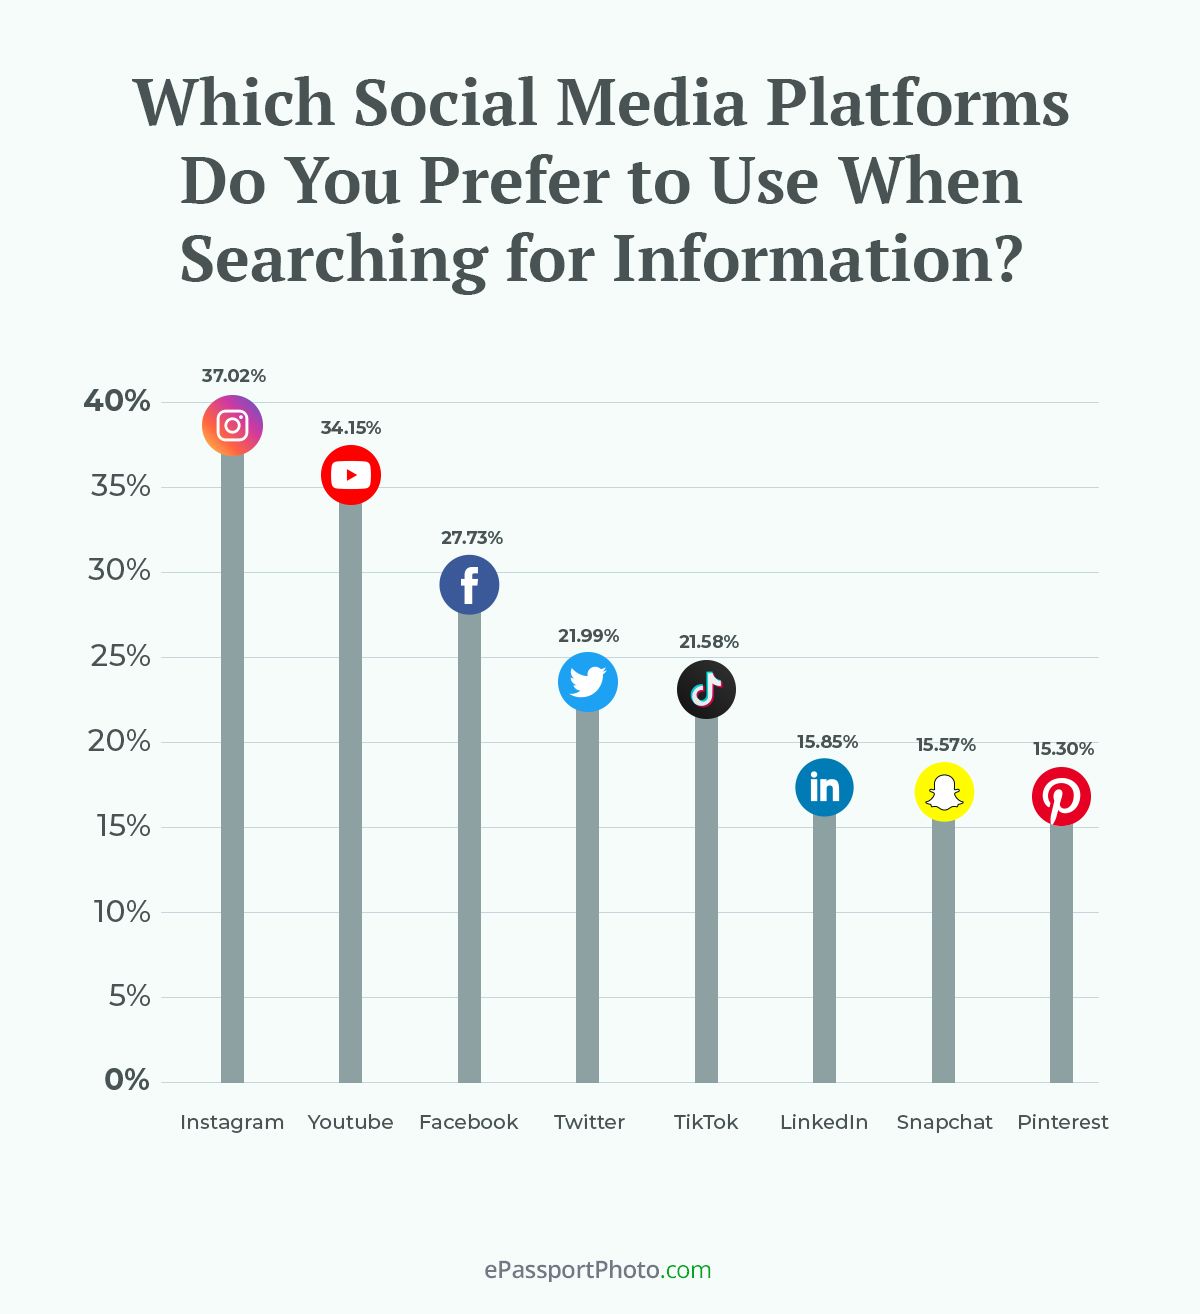 Instagram turned out to be the most popular search tool among social media with 37% of the vote